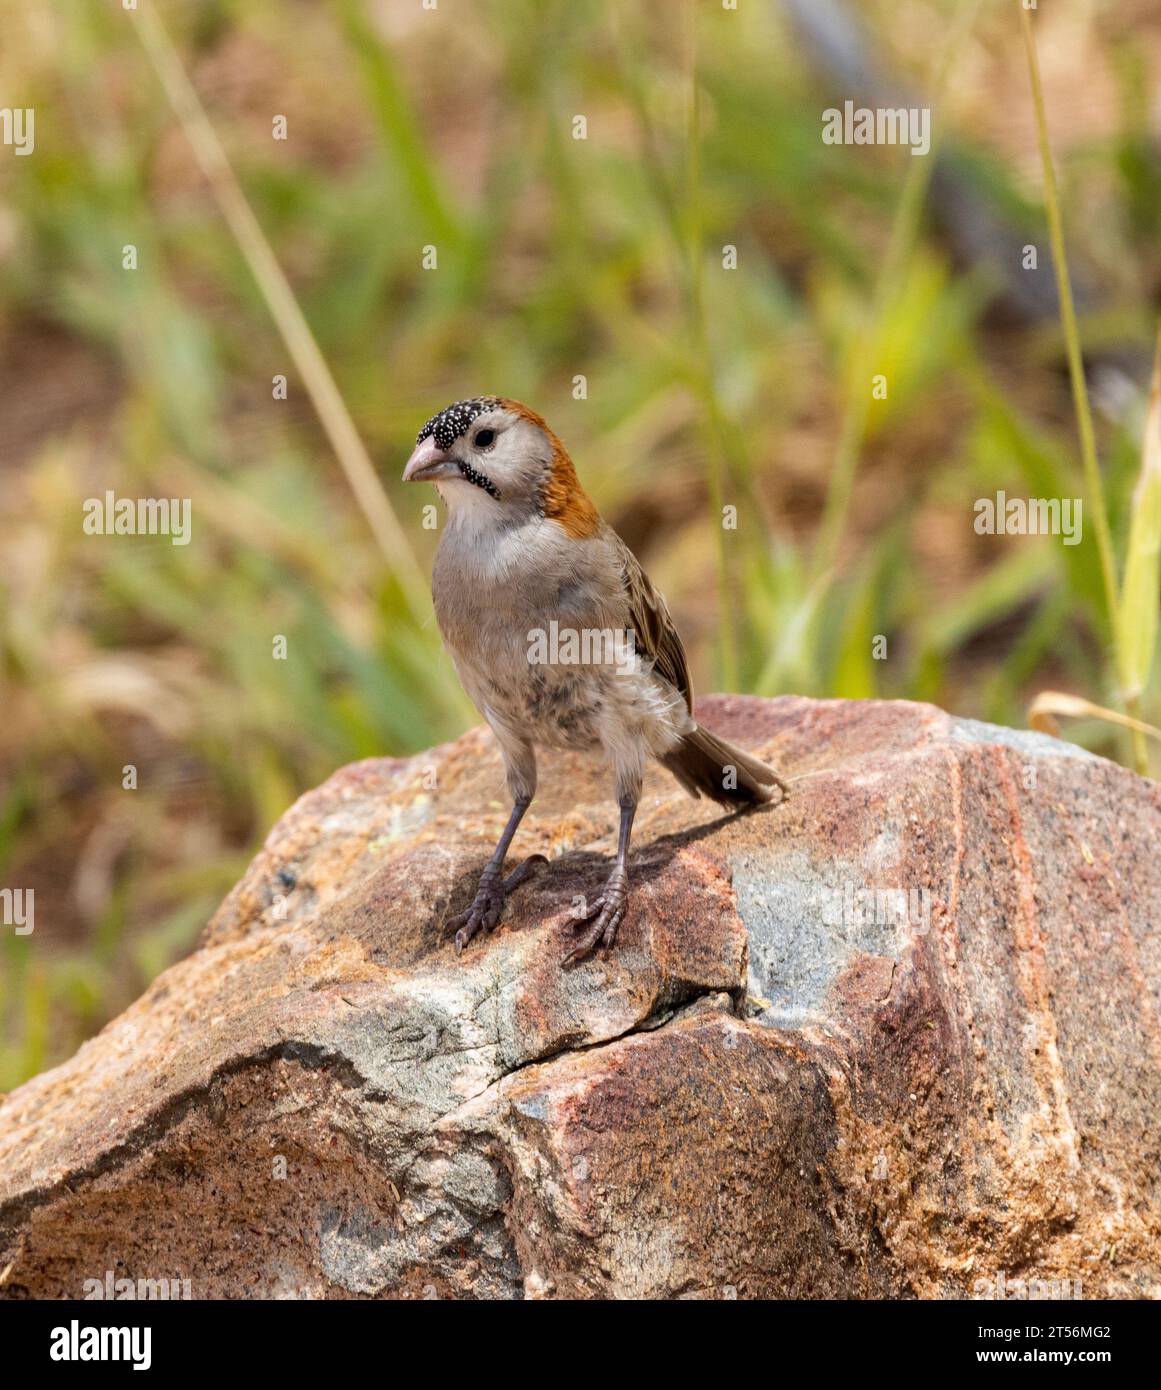 A small member of the sparrow family, the Speckle-fronted Weaver lives in family groups that cooperate in the breeding season with young helping. Stock Photo